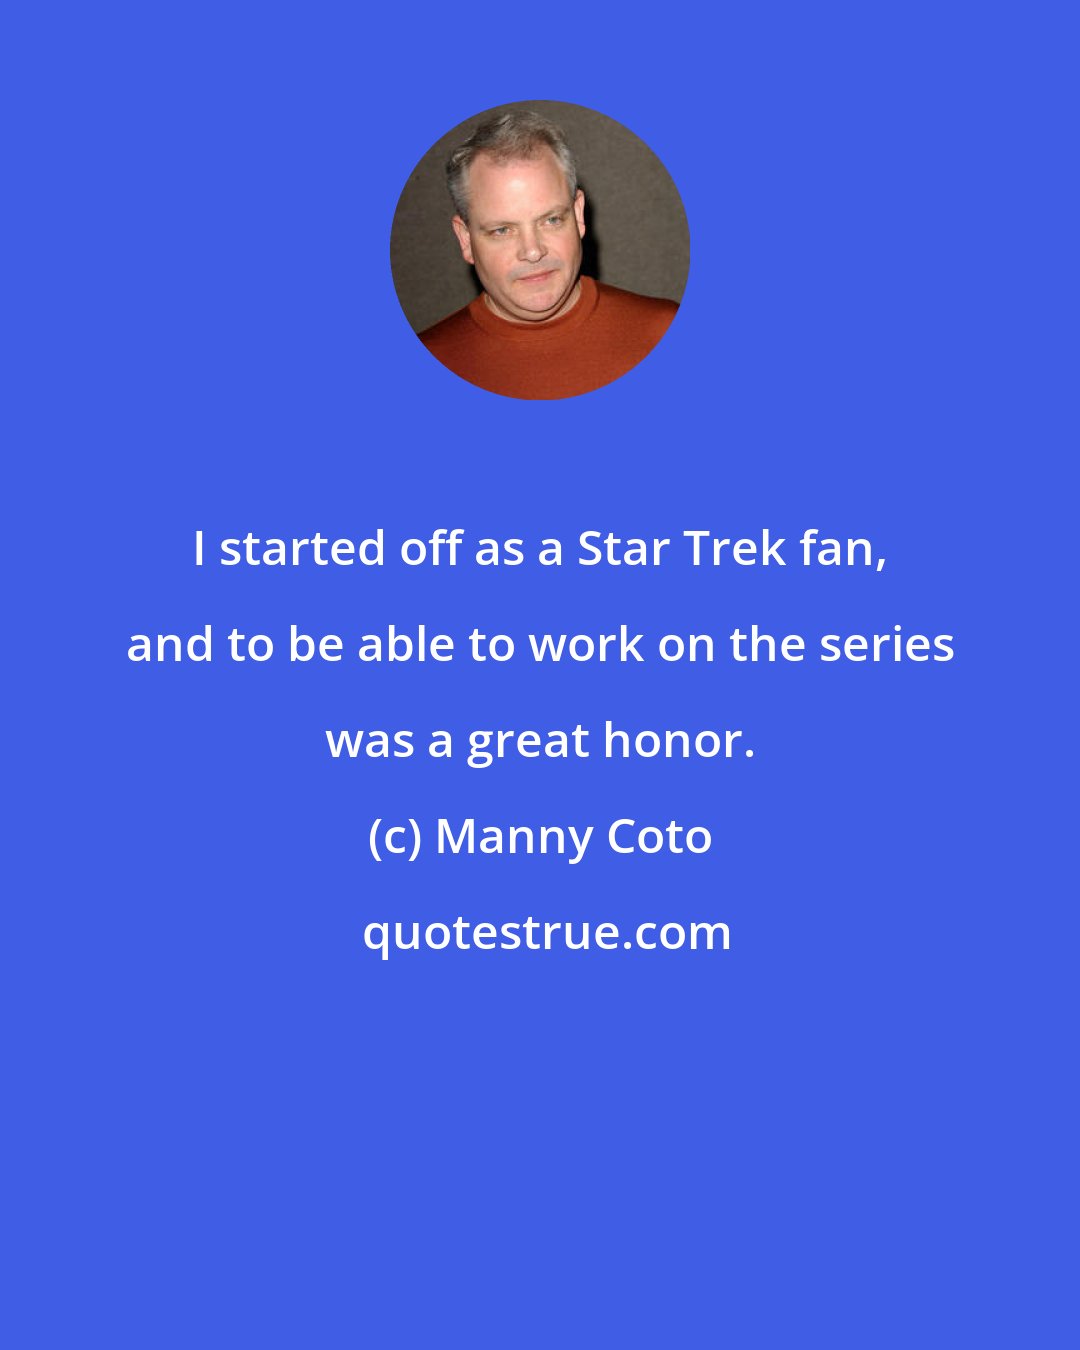 Manny Coto: I started off as a Star Trek fan, and to be able to work on the series was a great honor.